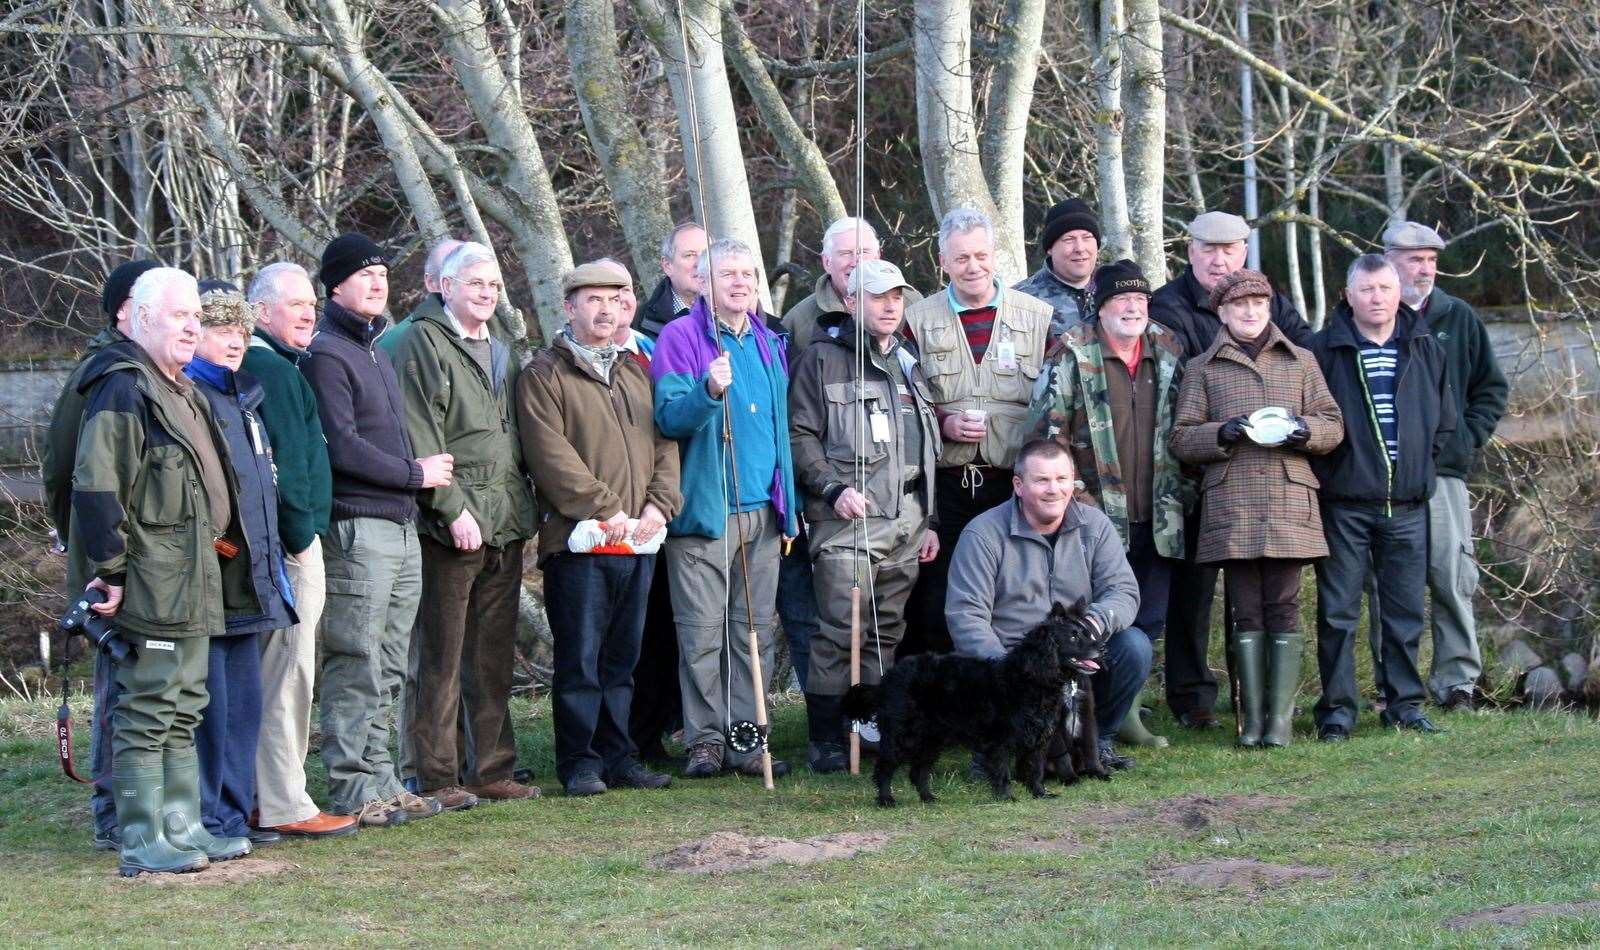 Nairn anglers in 2014 – the traditional start to the season will not take place this year.